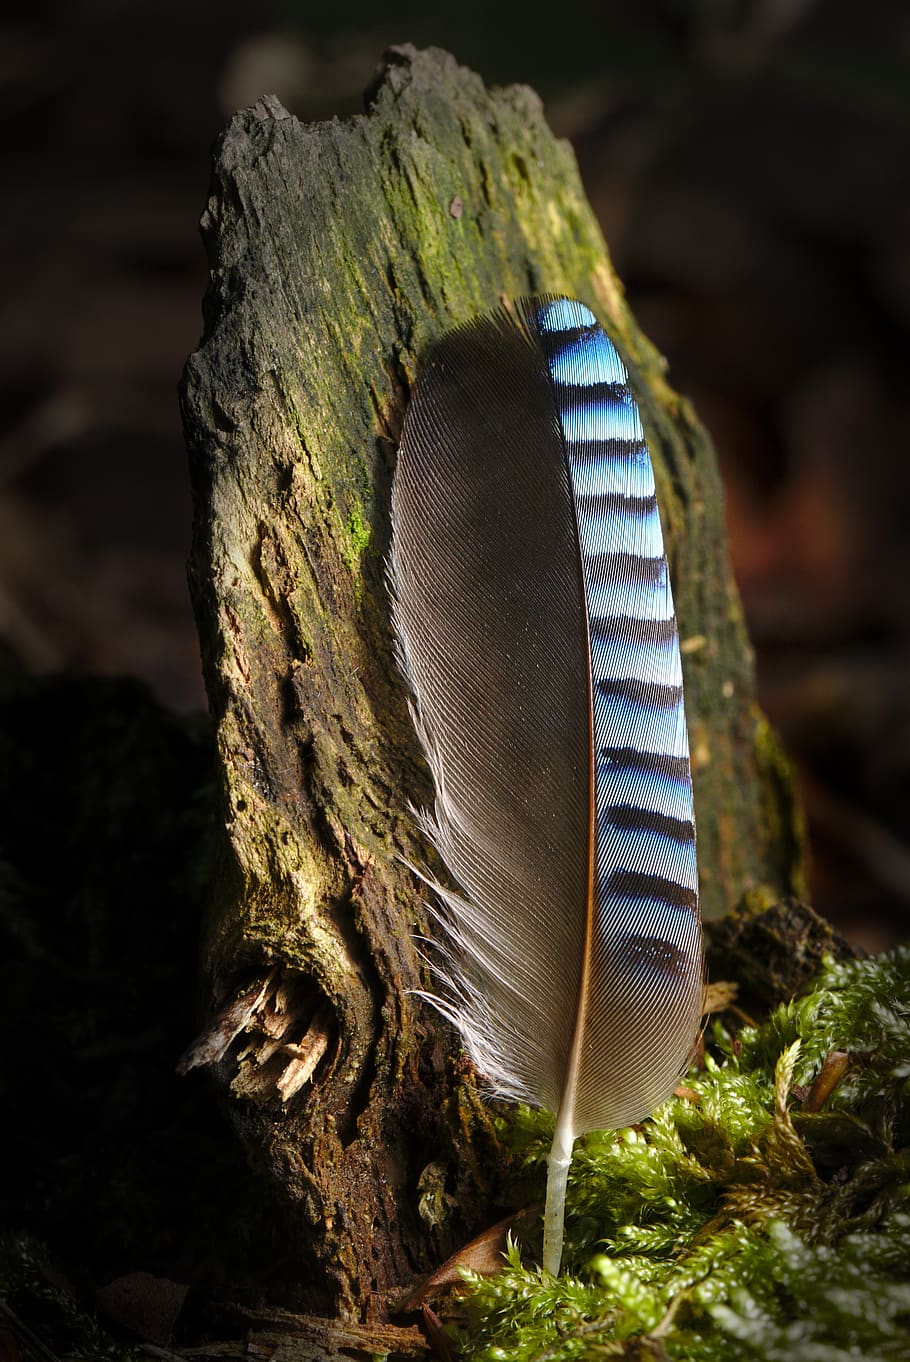 jay, feather, forest, close up, bird feather, blue, close-up, nature, plant, focus on foreground